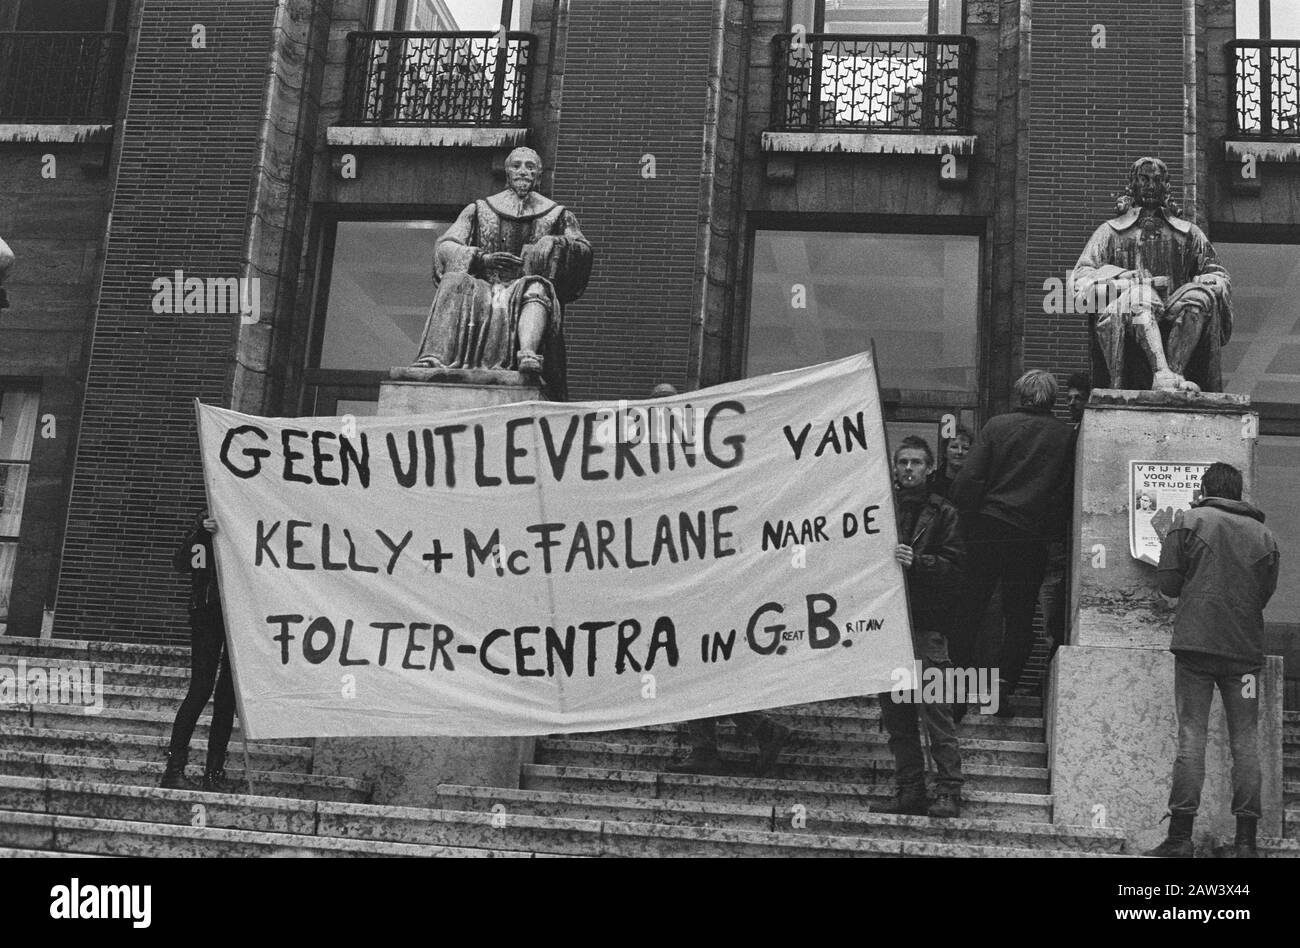 Process on extradition IRA members in The Hague; Opponents of extradition demonstrate to Supreme Court Date: September 10, 1986 Location: The Hague, South Holland Keywords: renditions, demonstrations, processes Stock Photo